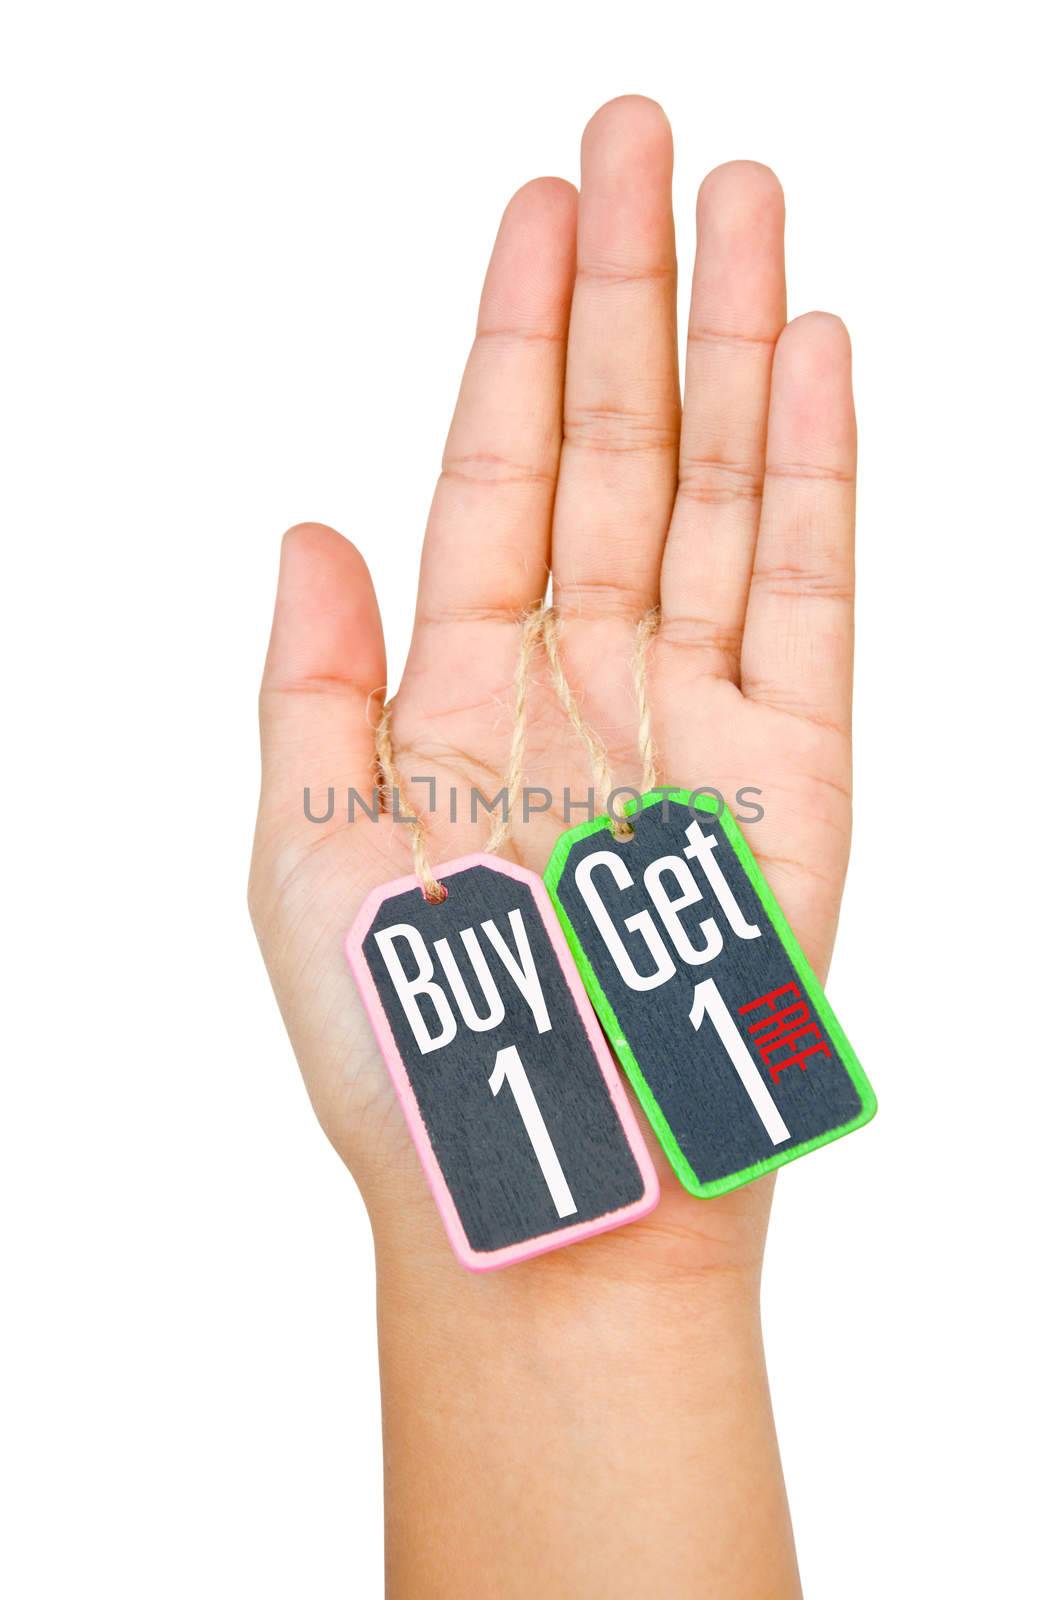 Buy 1 Get 1 label tag on women hand isolated on white background by Gamjai